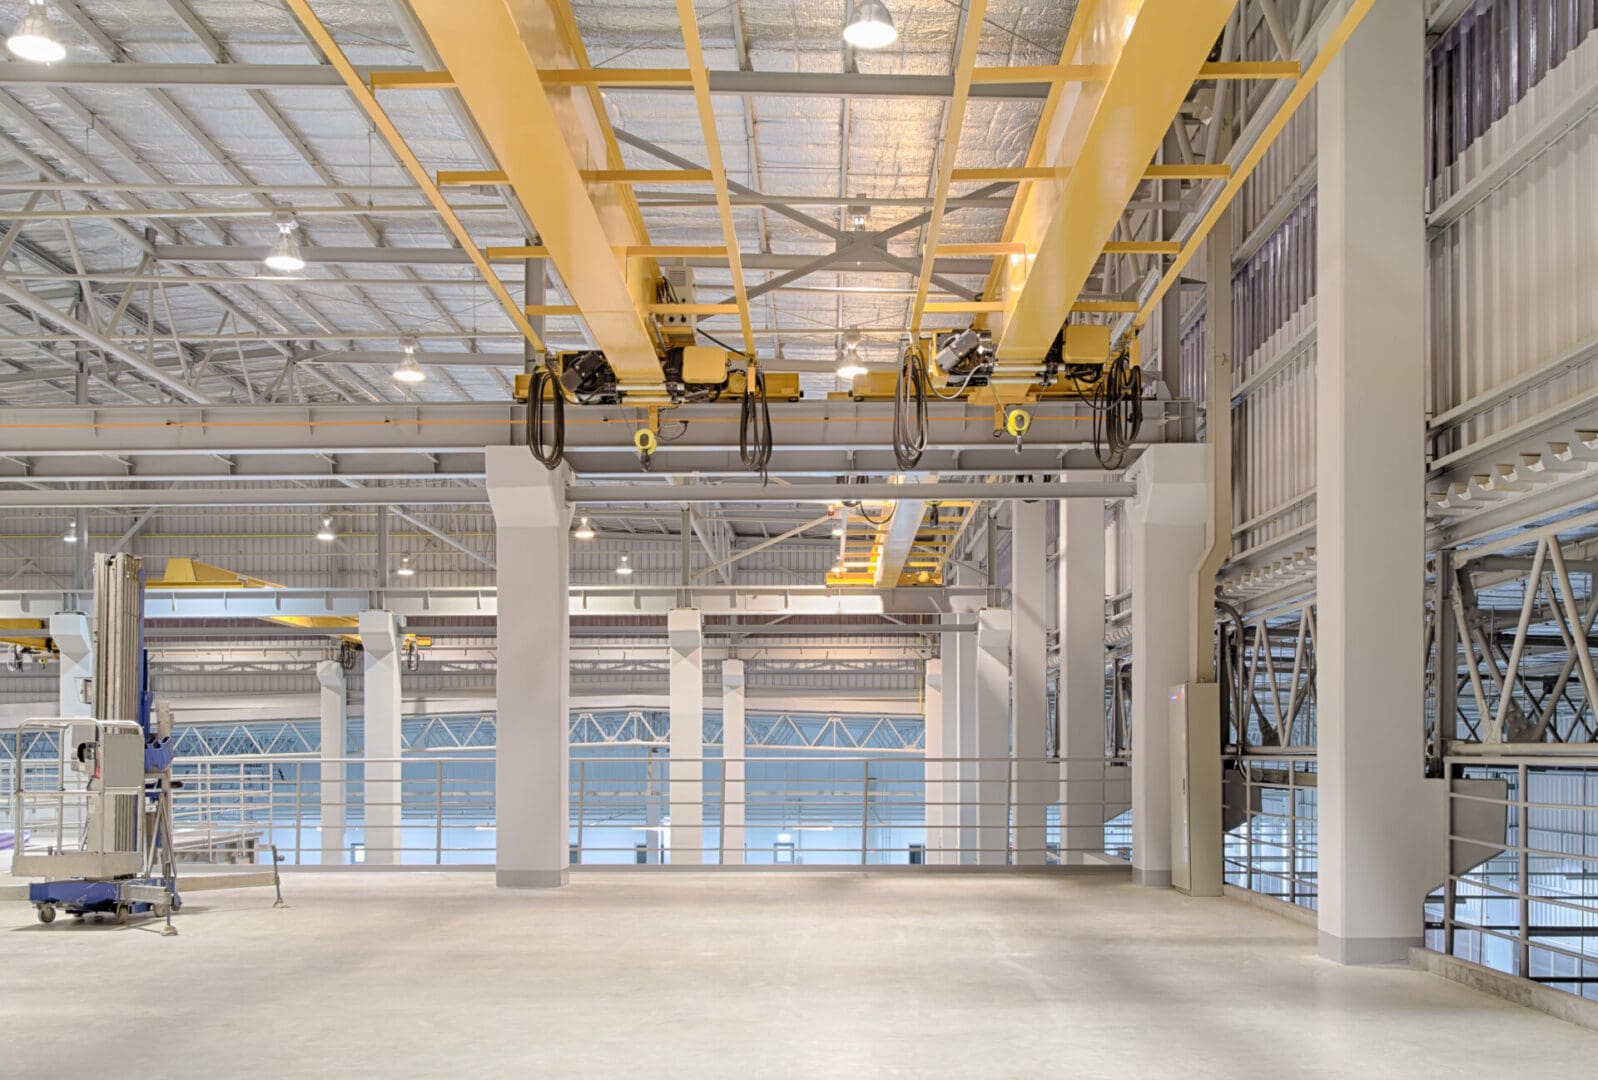 A large warehouse with yellow beams and white walls.